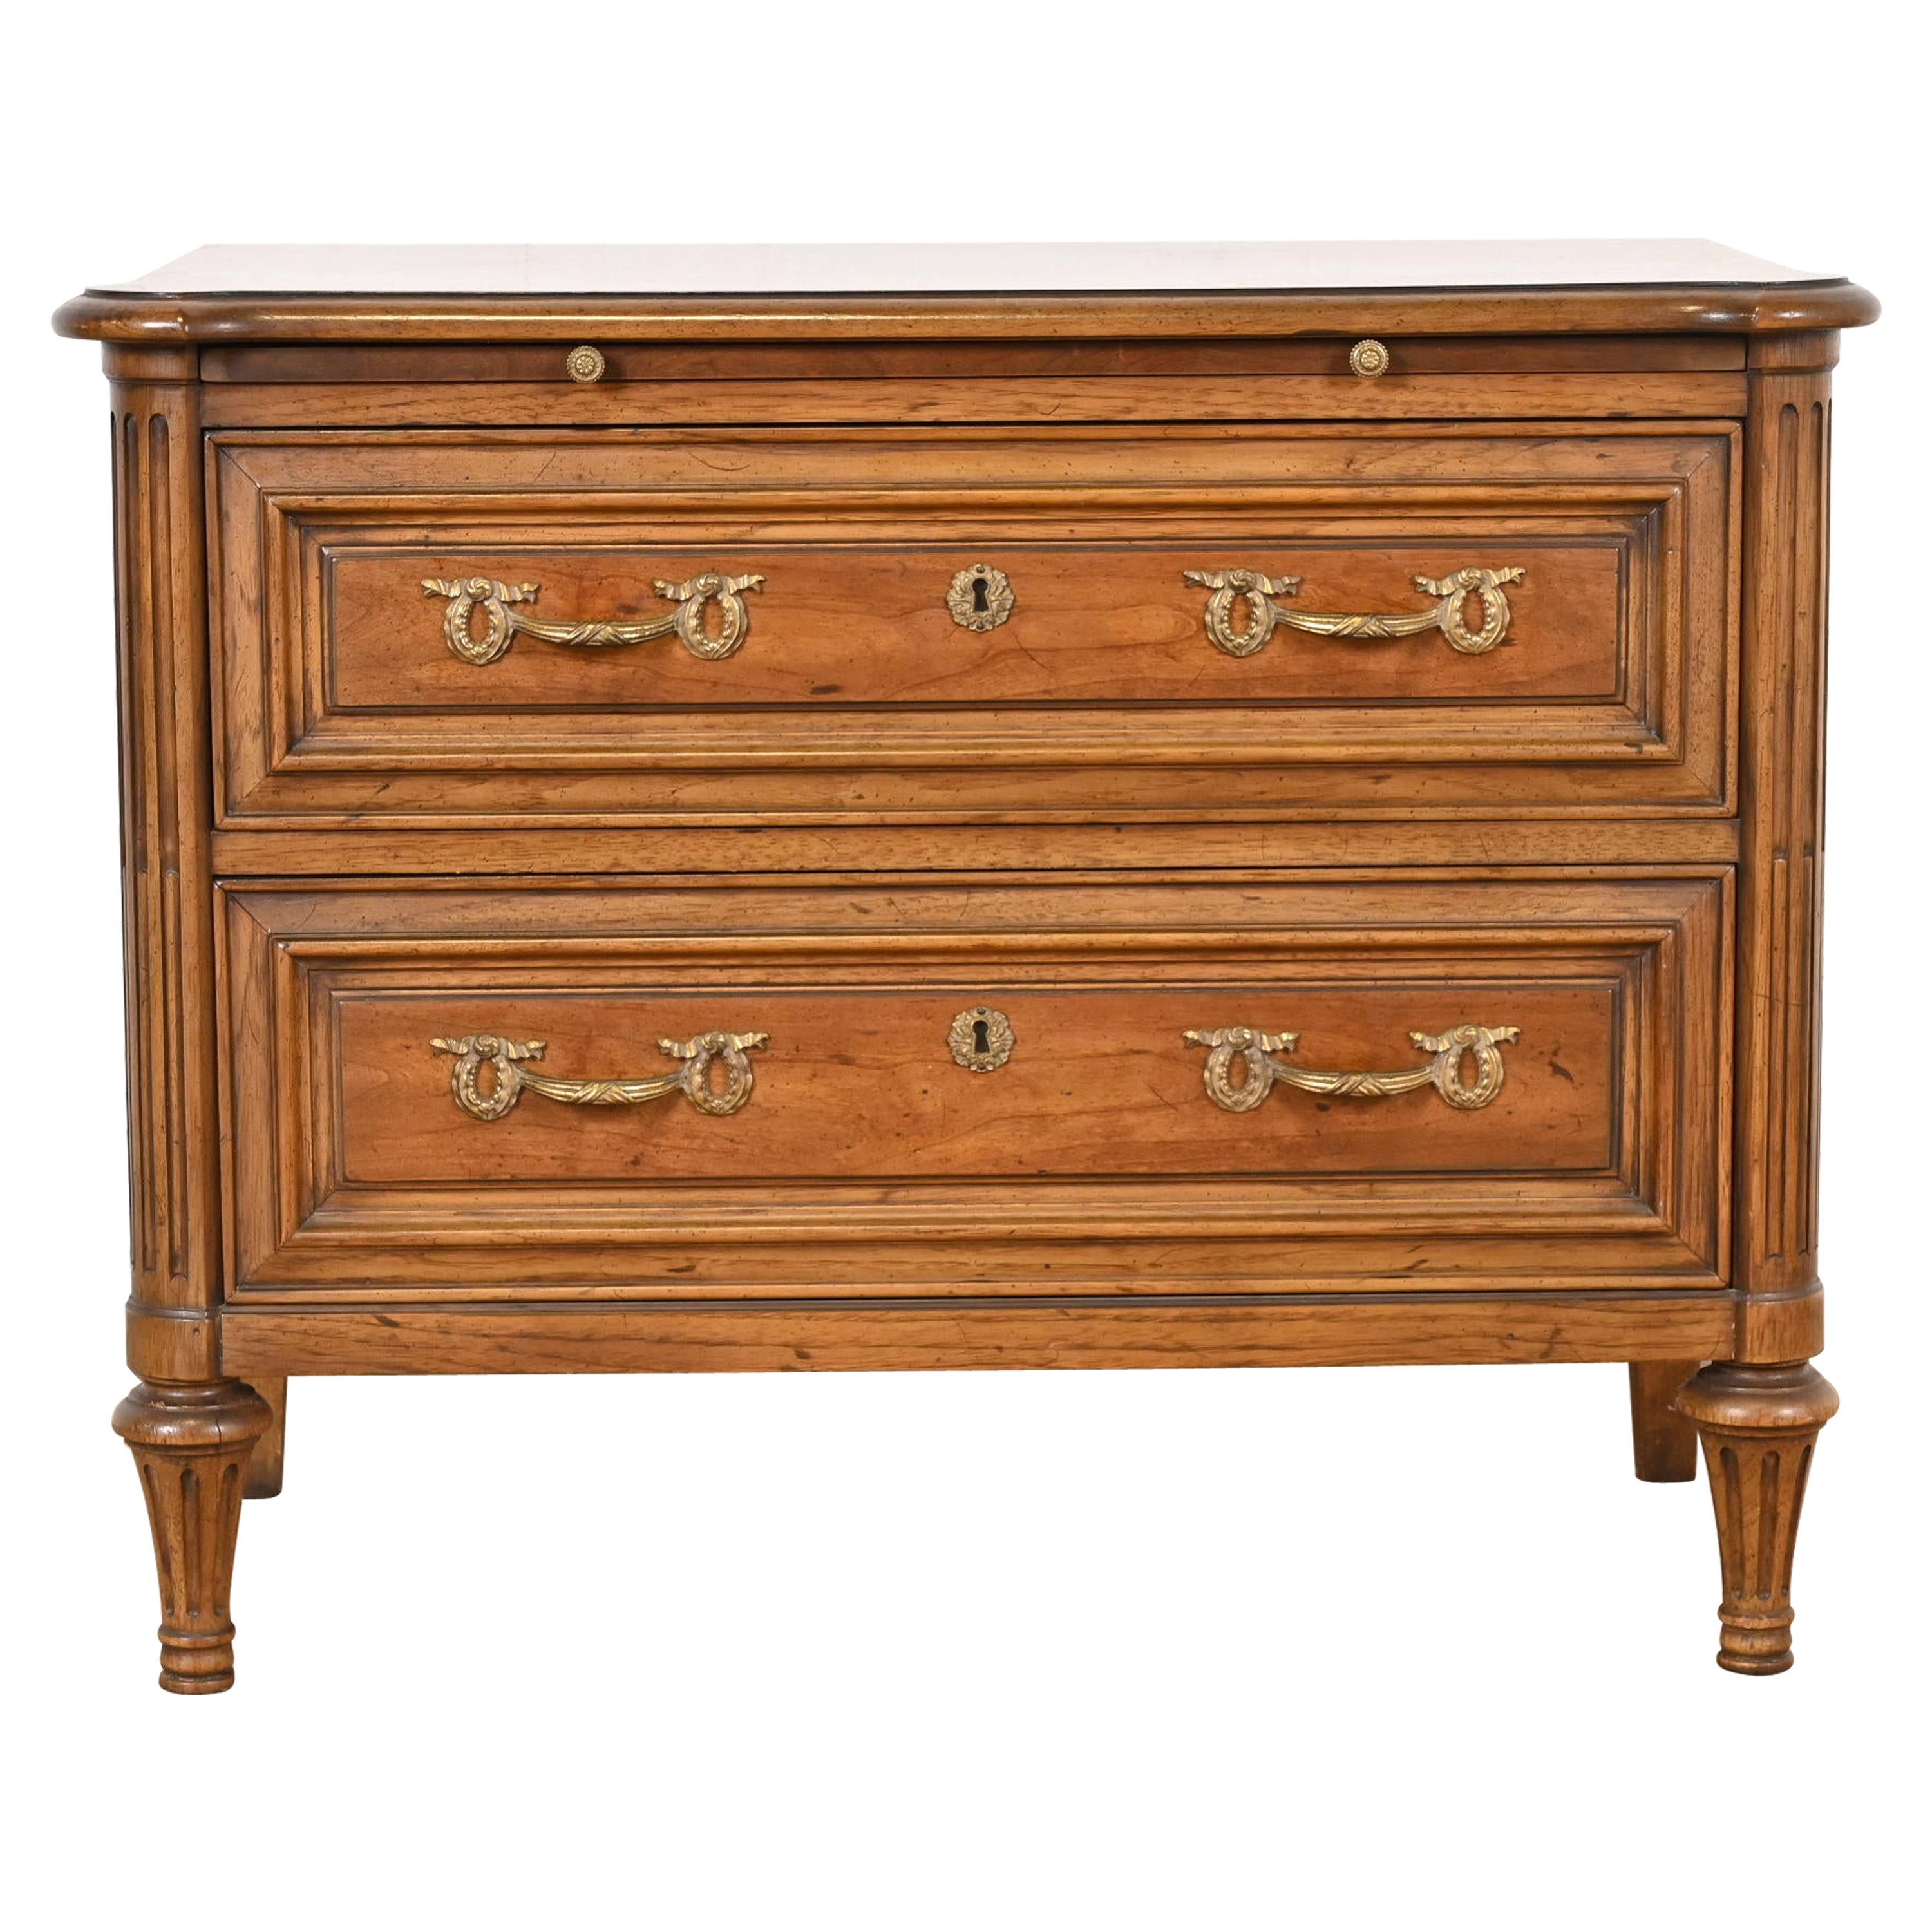 What is a Henredon cabinet?